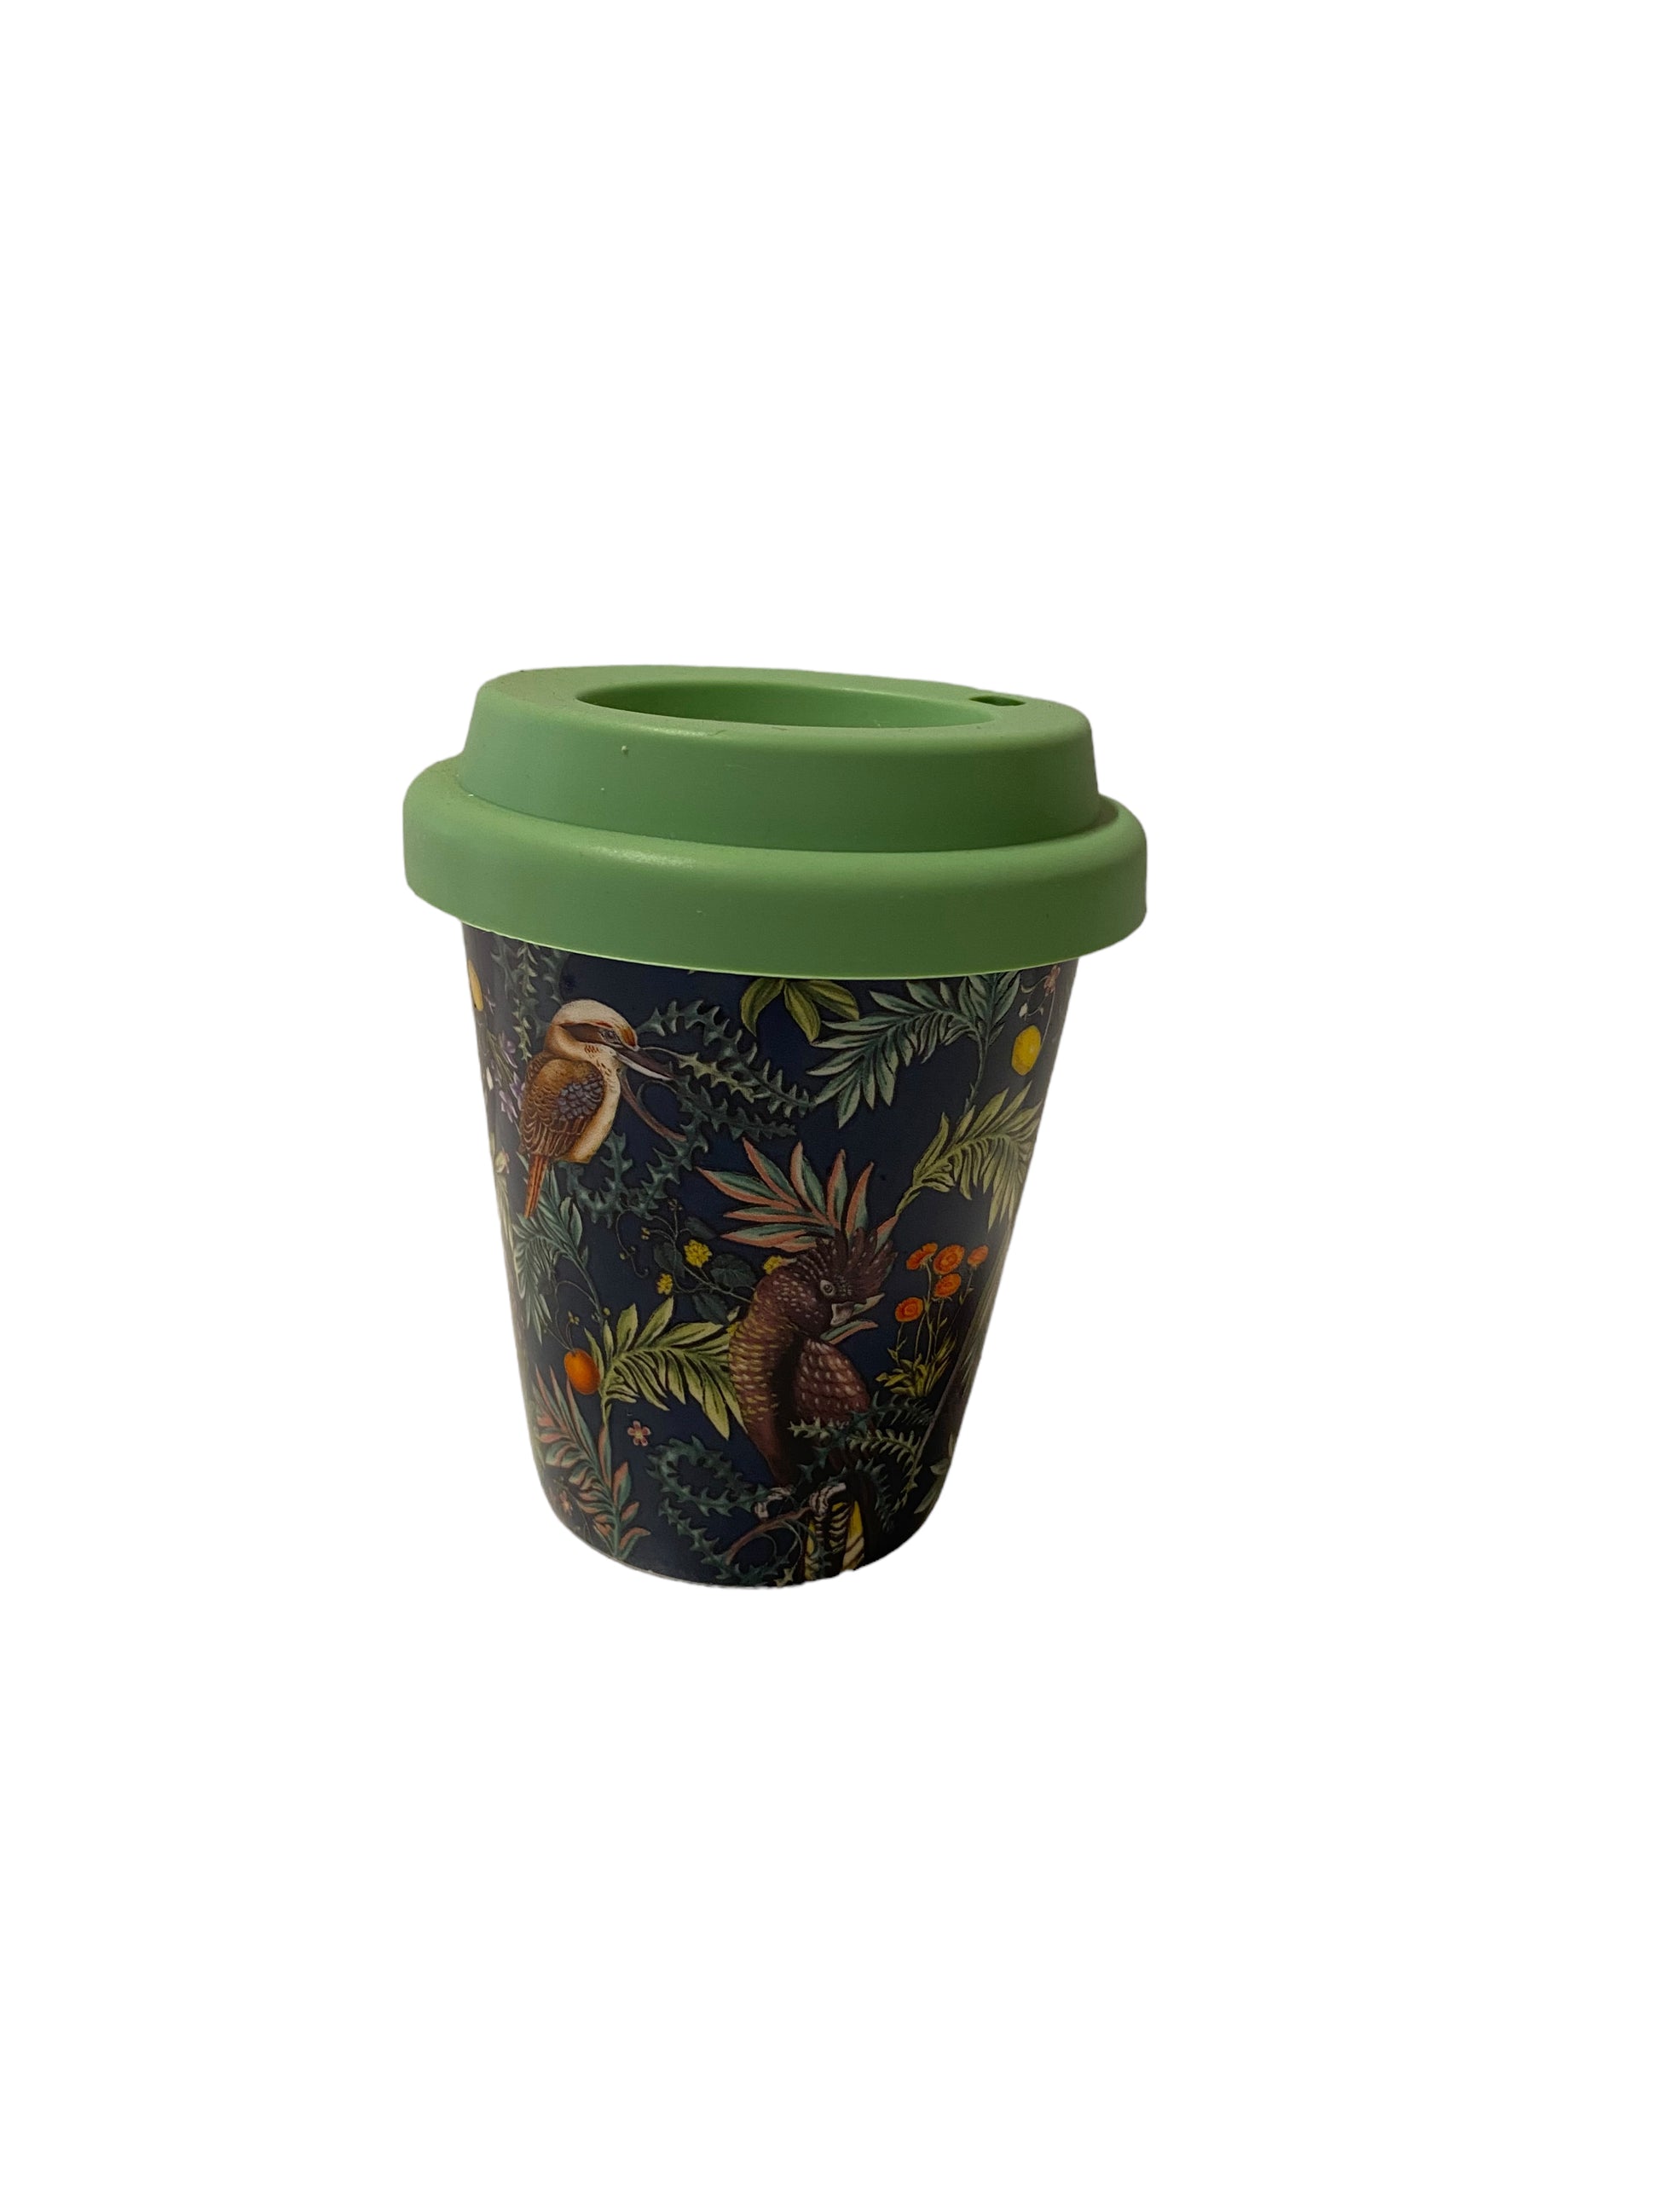 Cup Coffee Mug Parrot Cockatoo Bird - The Renmy Store Homewares & Gifts 